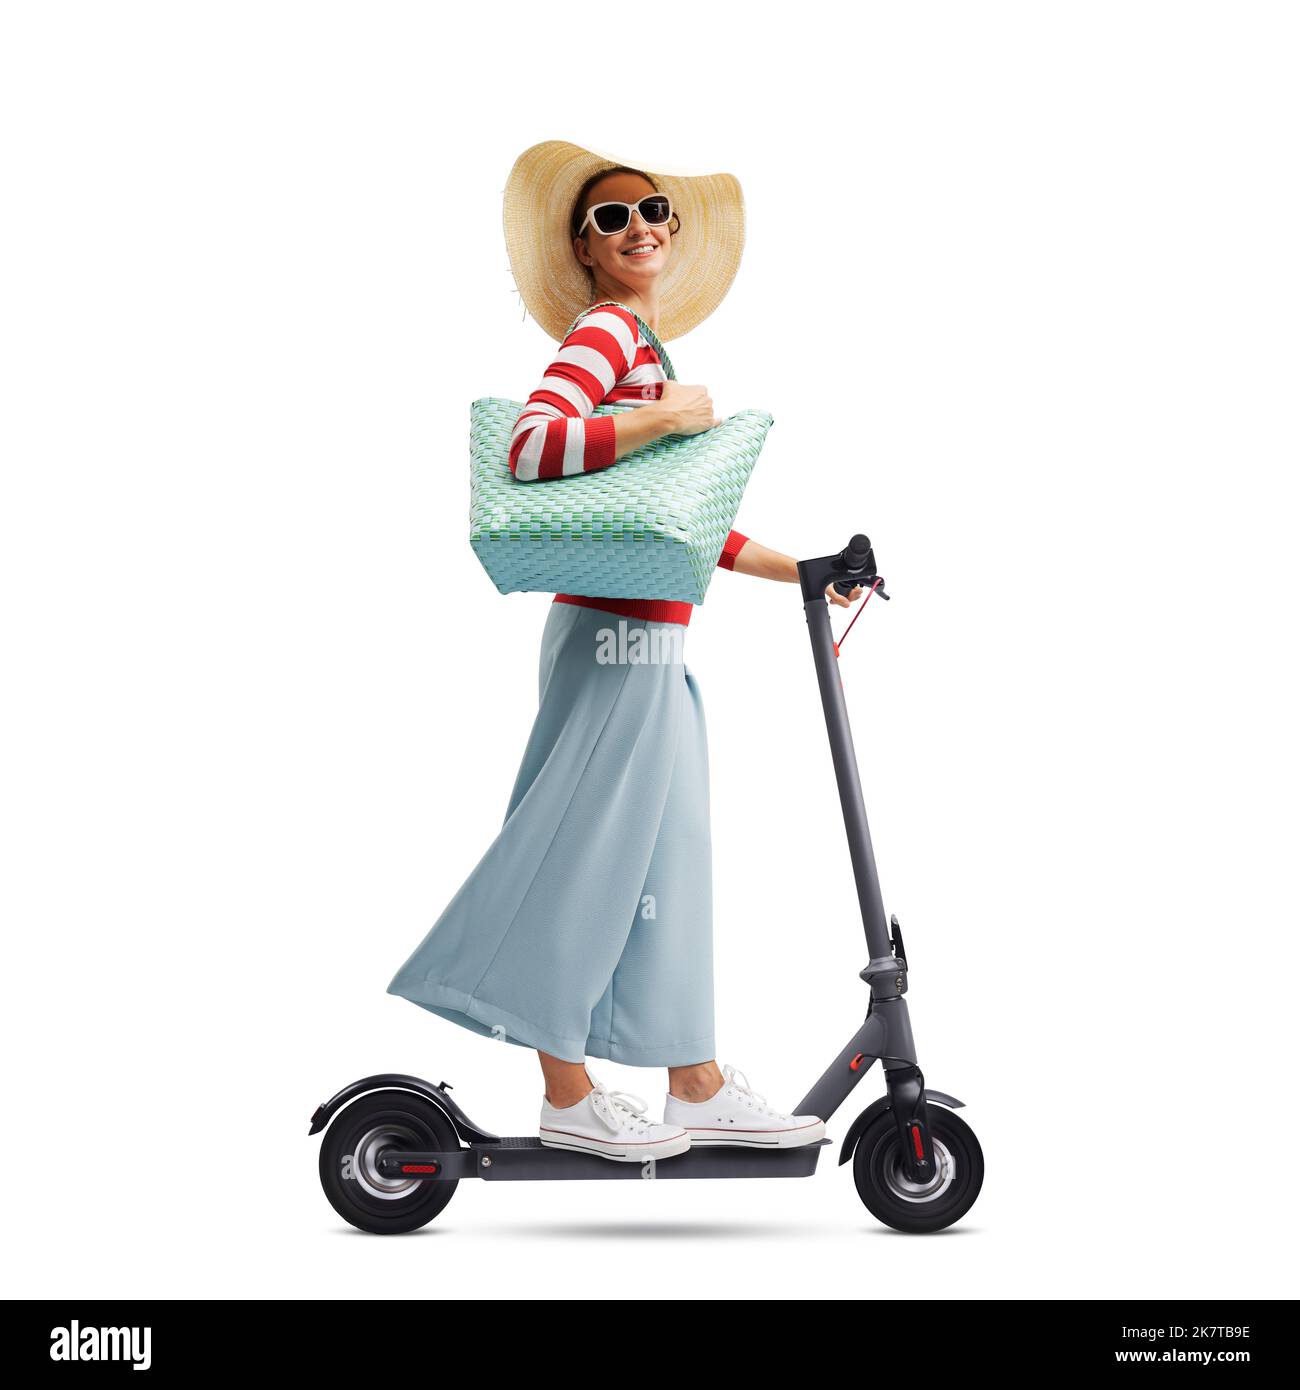 Happy fashionable woman riding an eco-friendly electric scooter, smart mobility concept Stock Photo